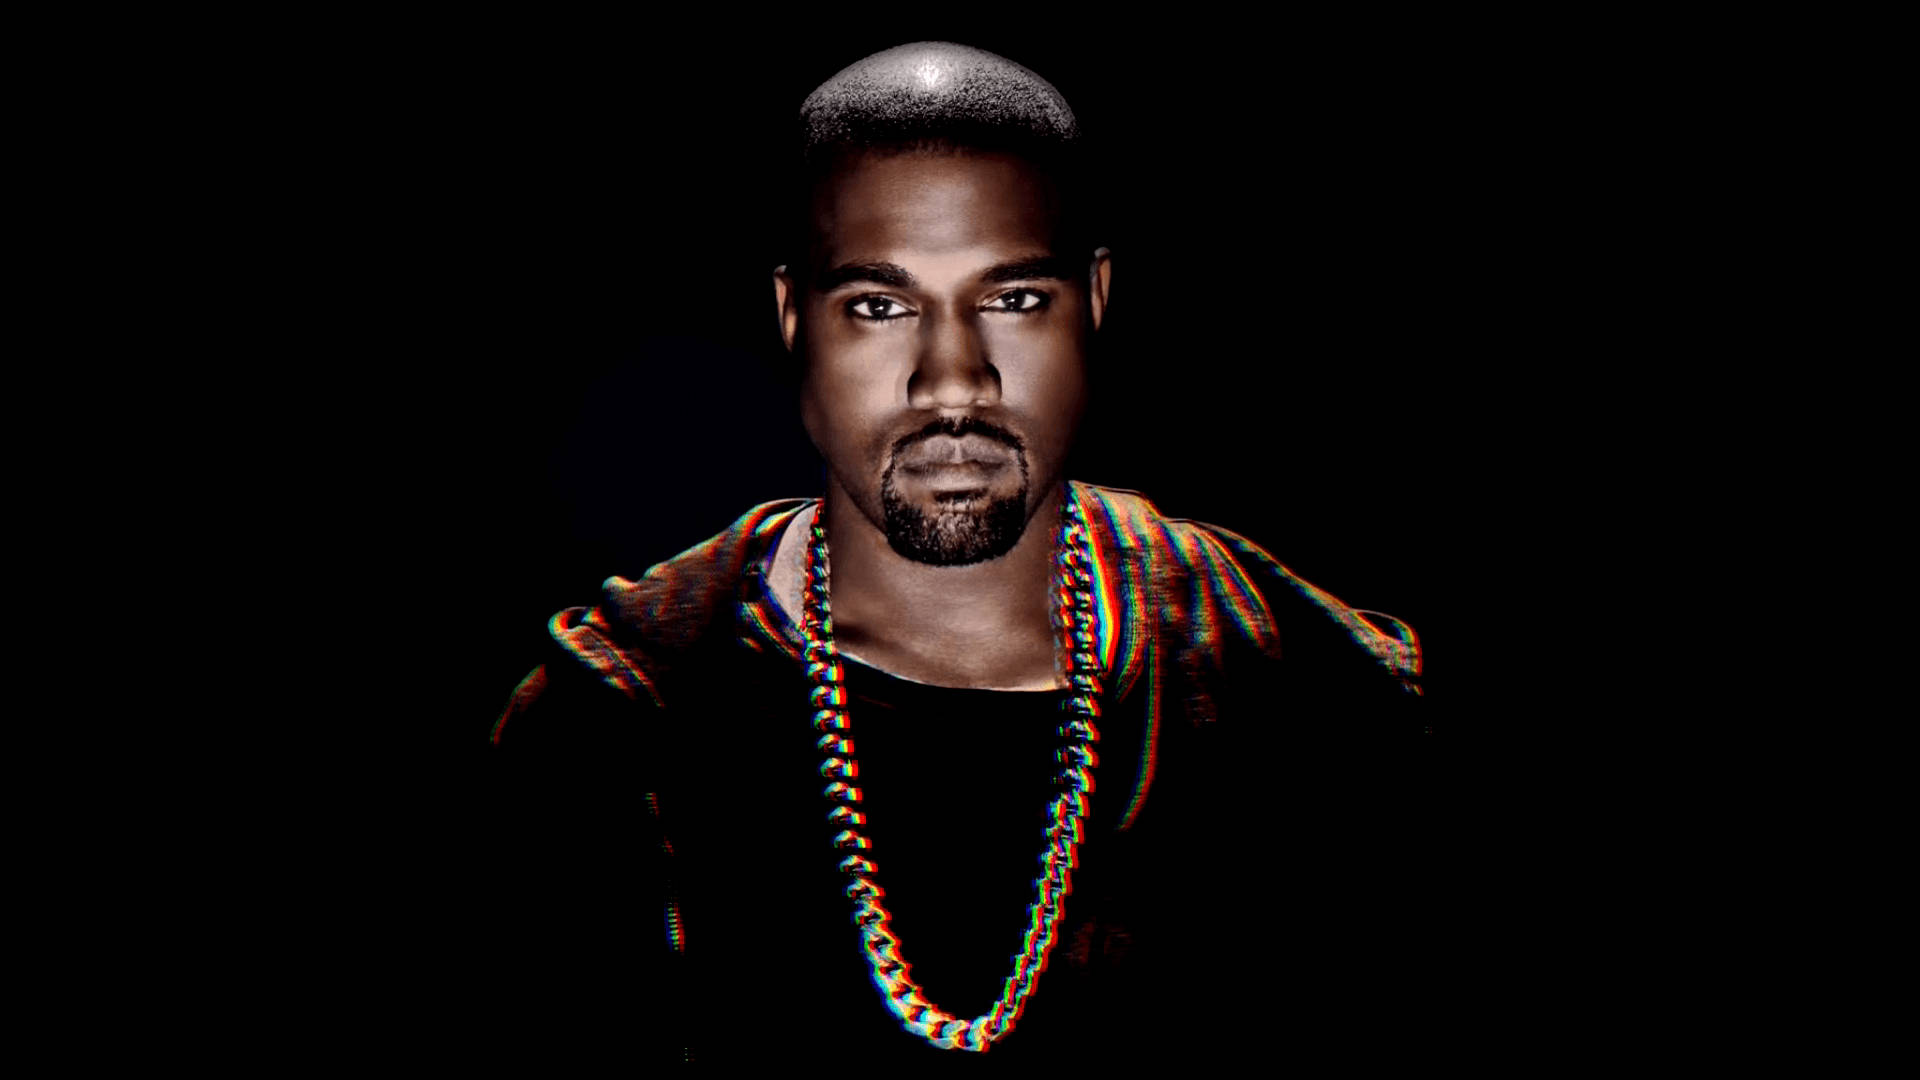 Kanye West With Big Gold Chain Background